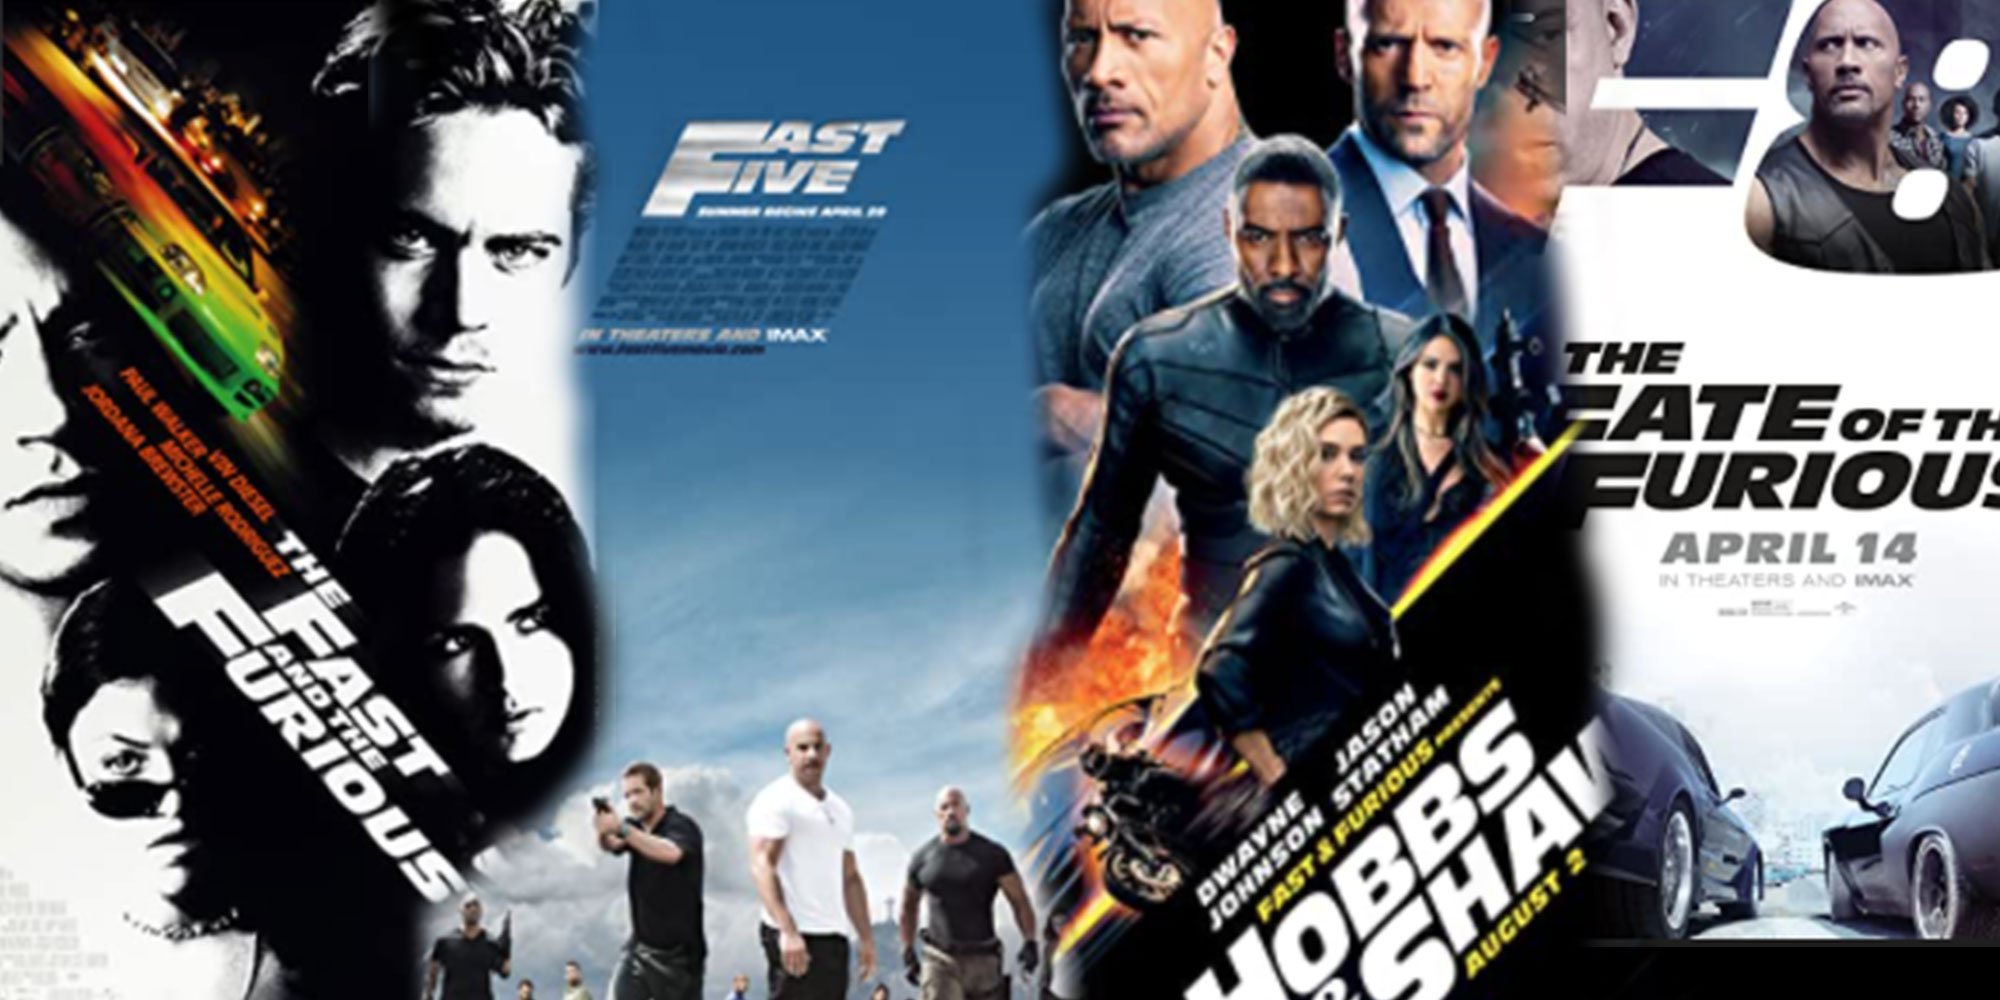 How to watch fast and furious movies